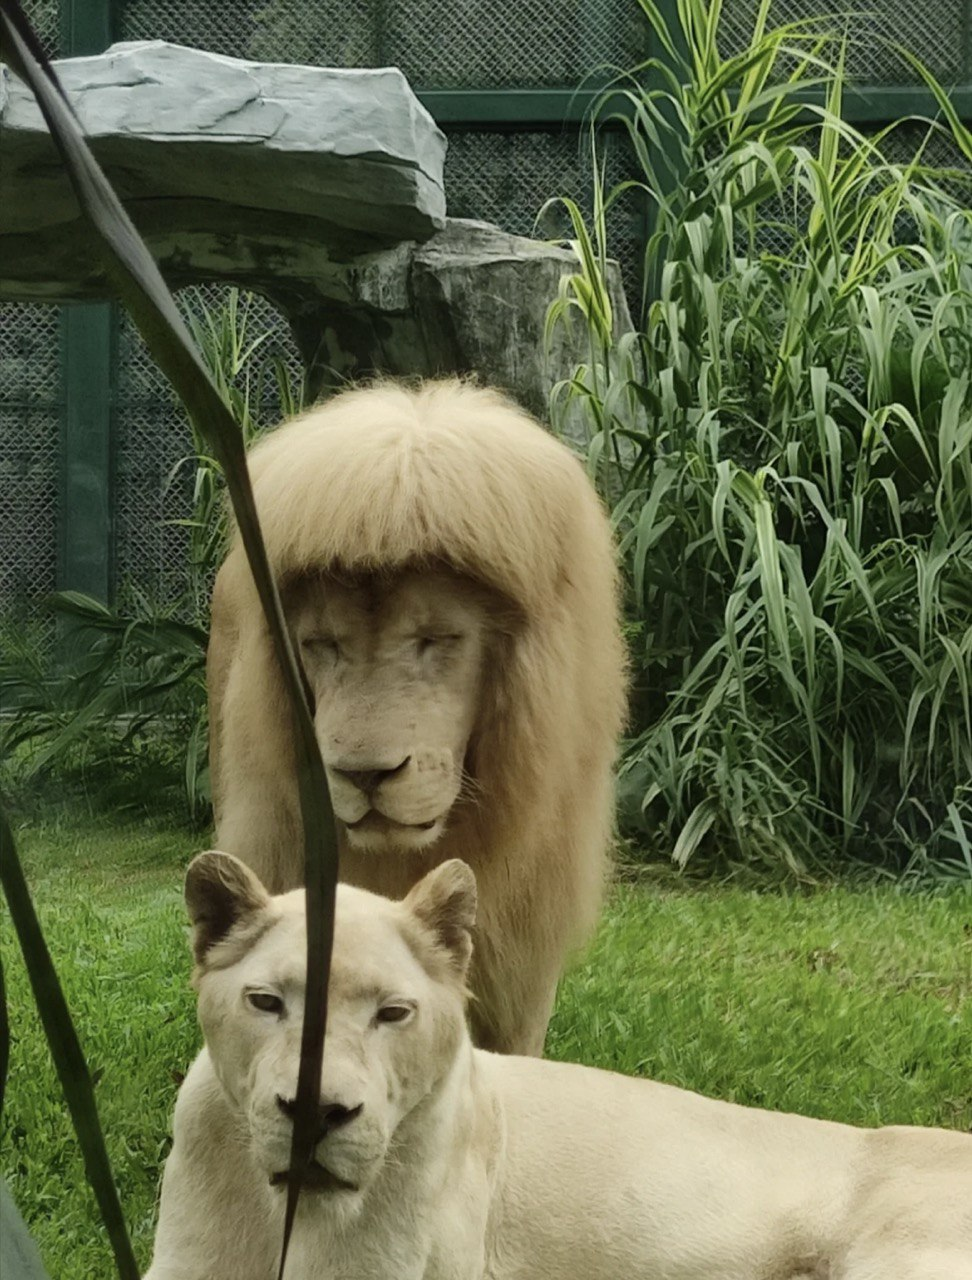 Lion with stylish fringe spotted at guangzhou zoo, staff denies grooming its mane